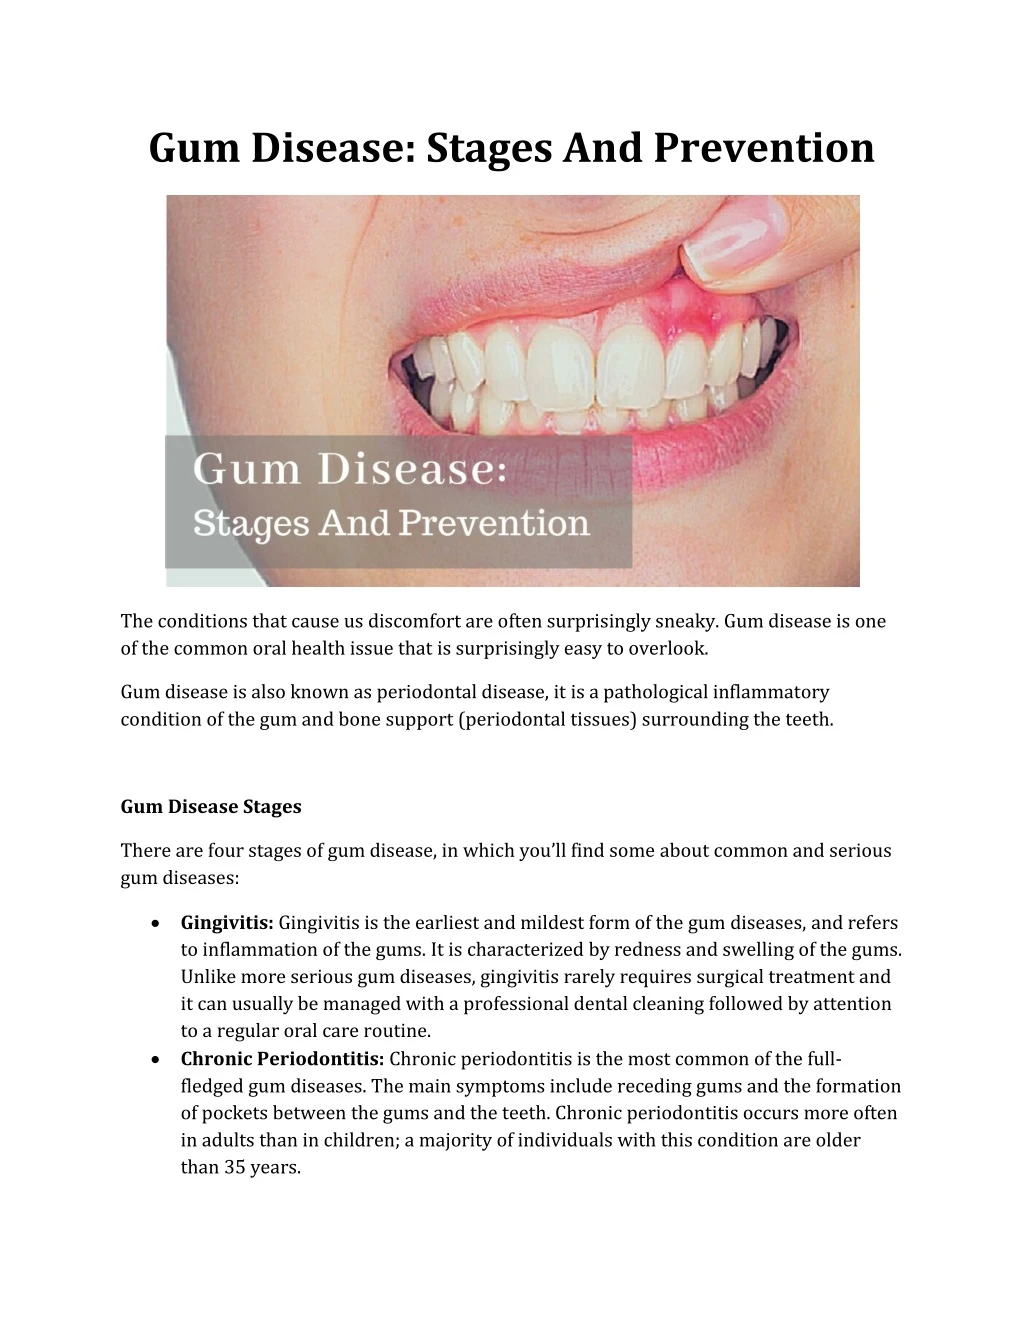 gum disease stages and prevention